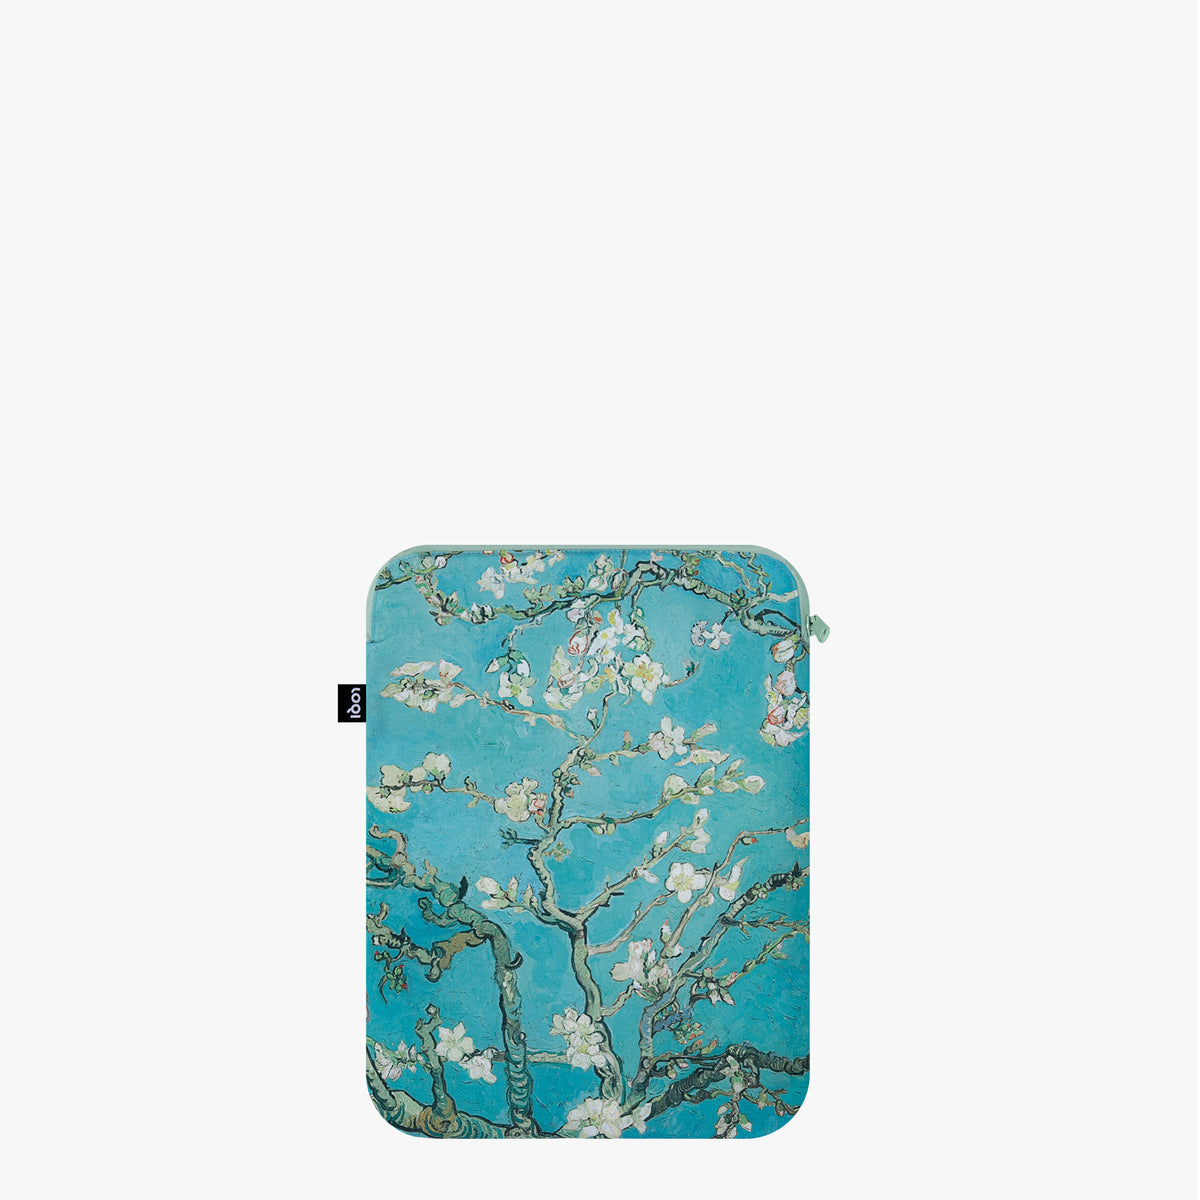 Almond Blossom Recycled Laptop Sleeve 24 x 33 cm